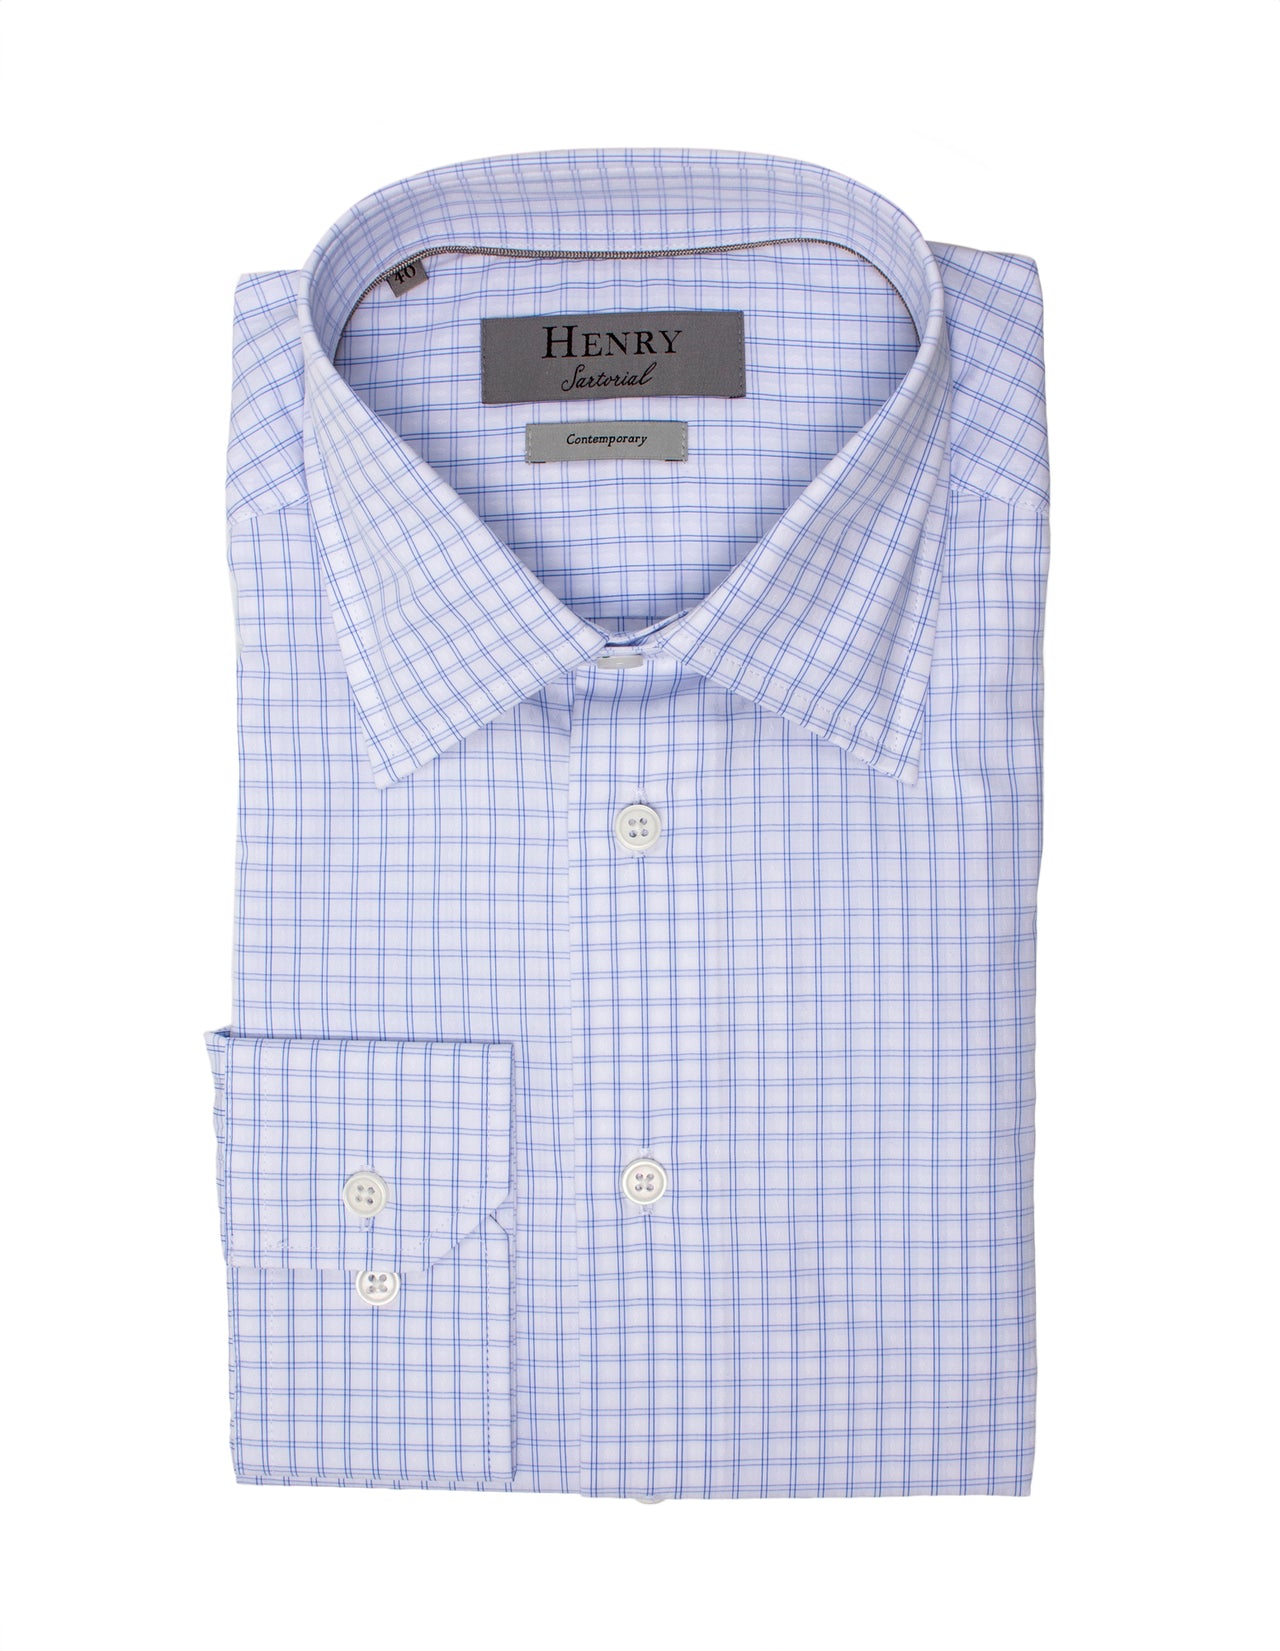 HENRY SARTORIAL Classic Fit Check Shirt BLUE/WHITE